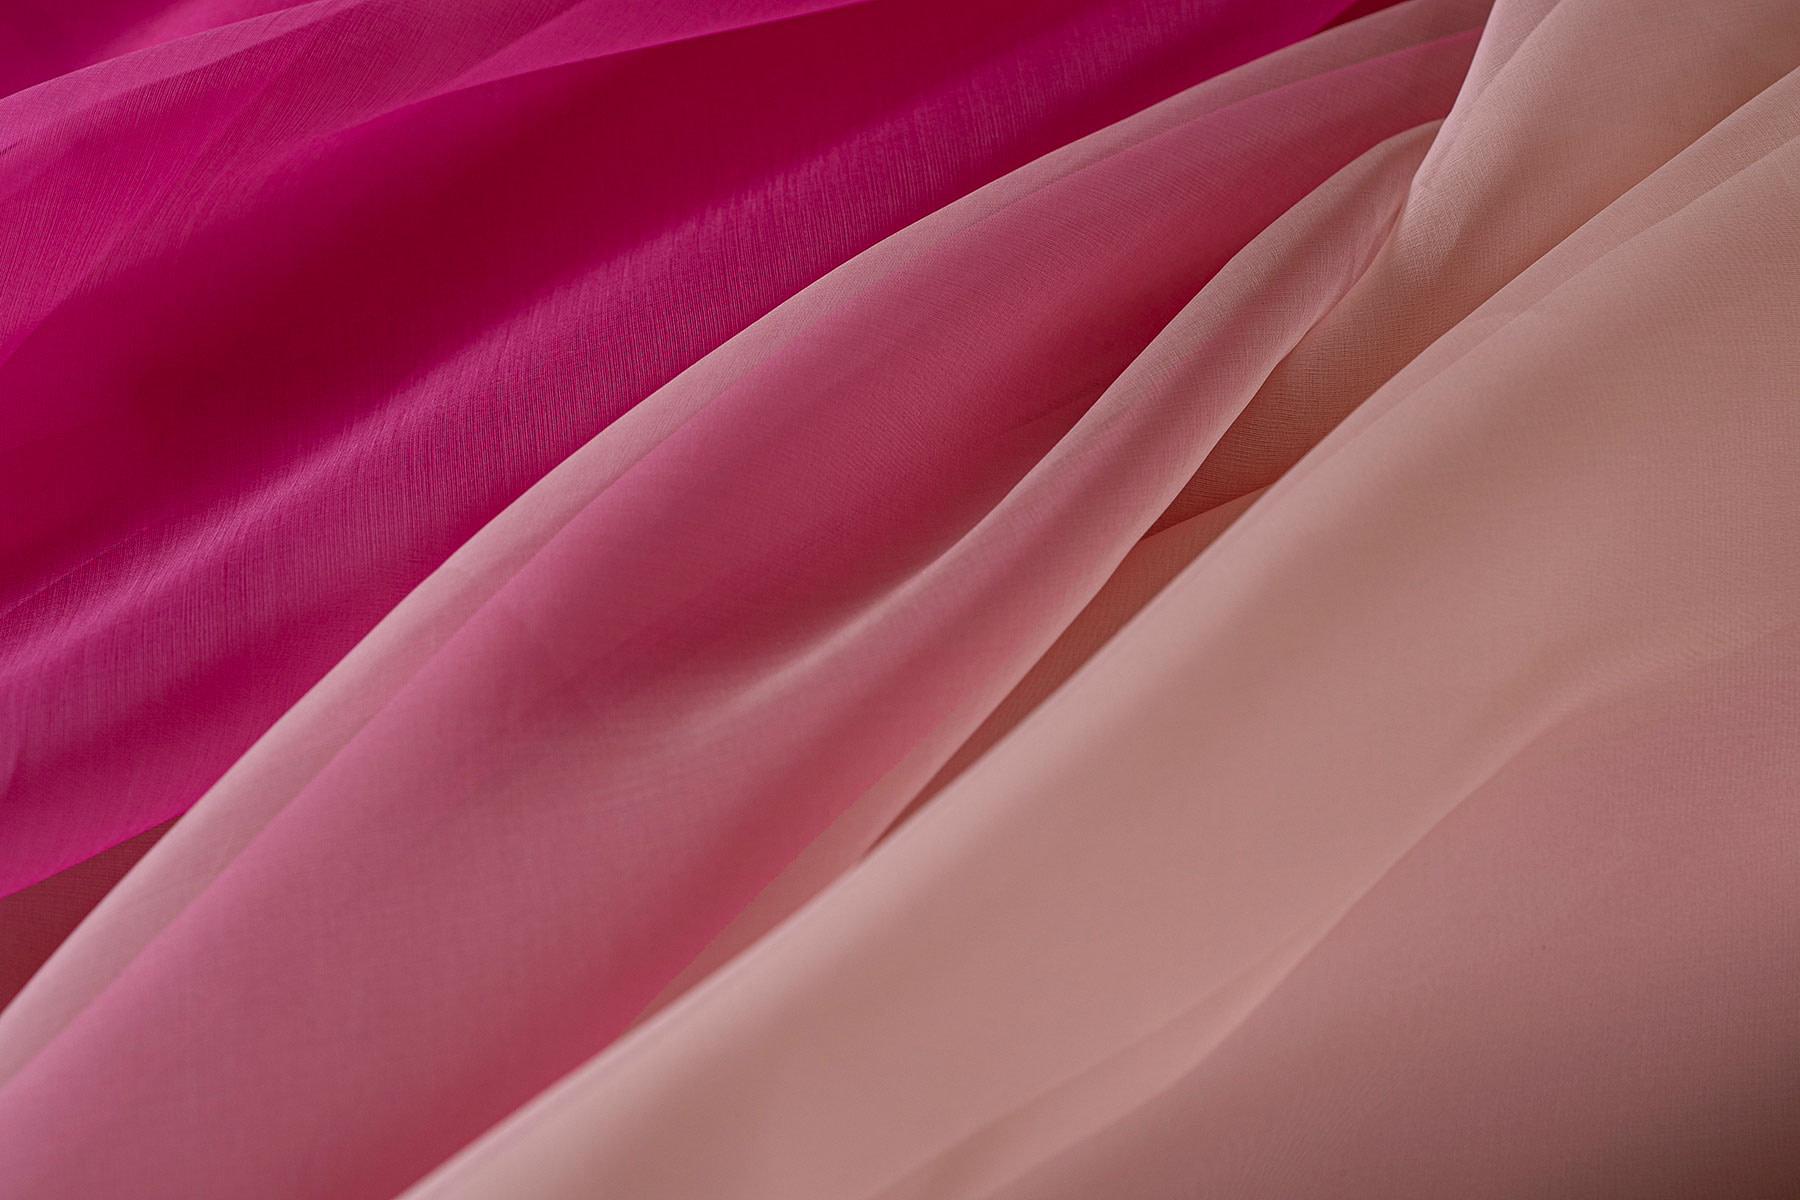 Silk Organza Fabric: 100% Silk Exclusive Fabrics from Italy by